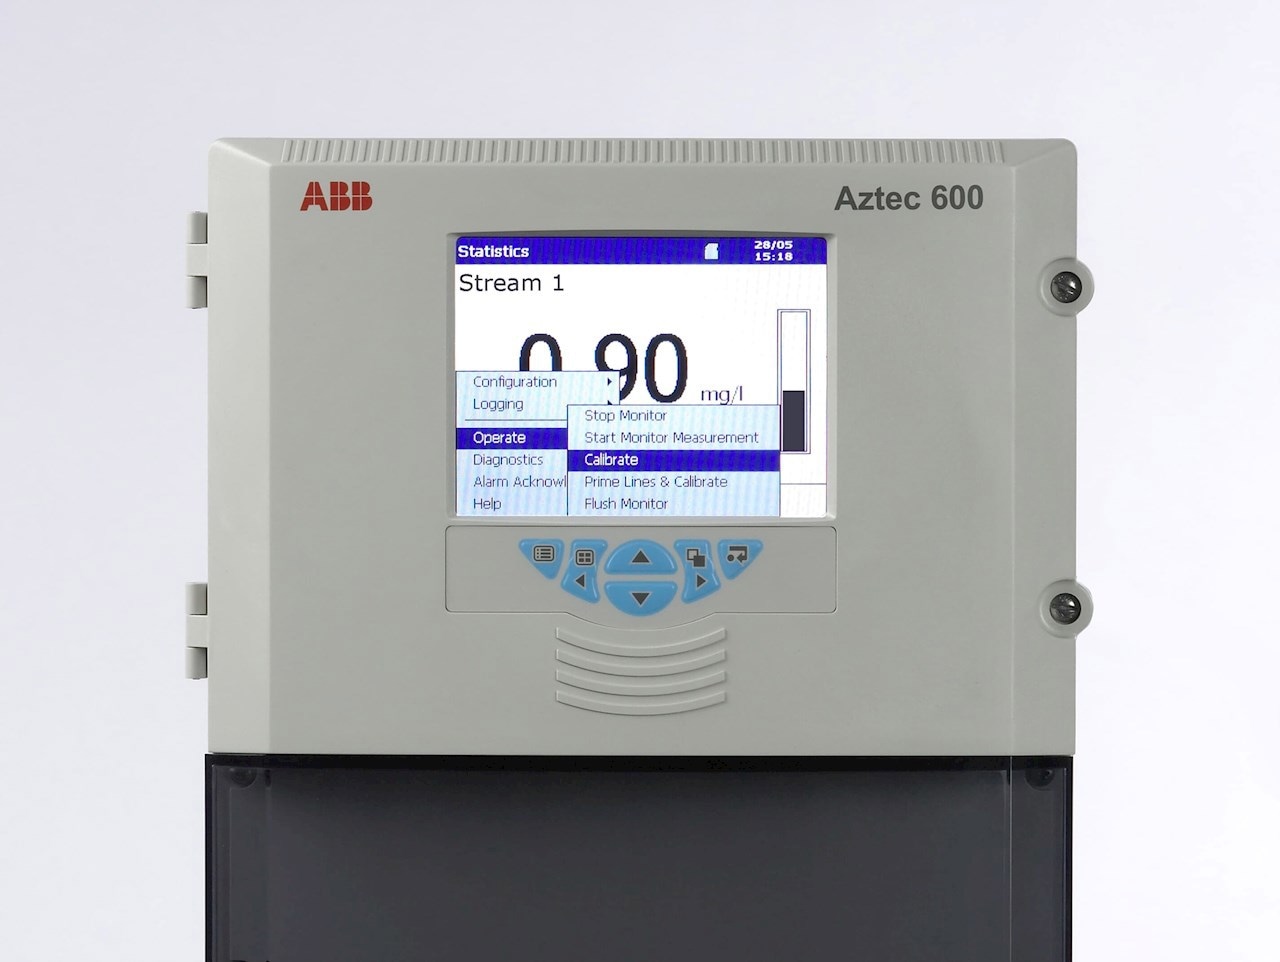 The Aztec 600 analyzers enable accurate and reliable measurement of a range of key parameters in potable and wastewater treatment processes.